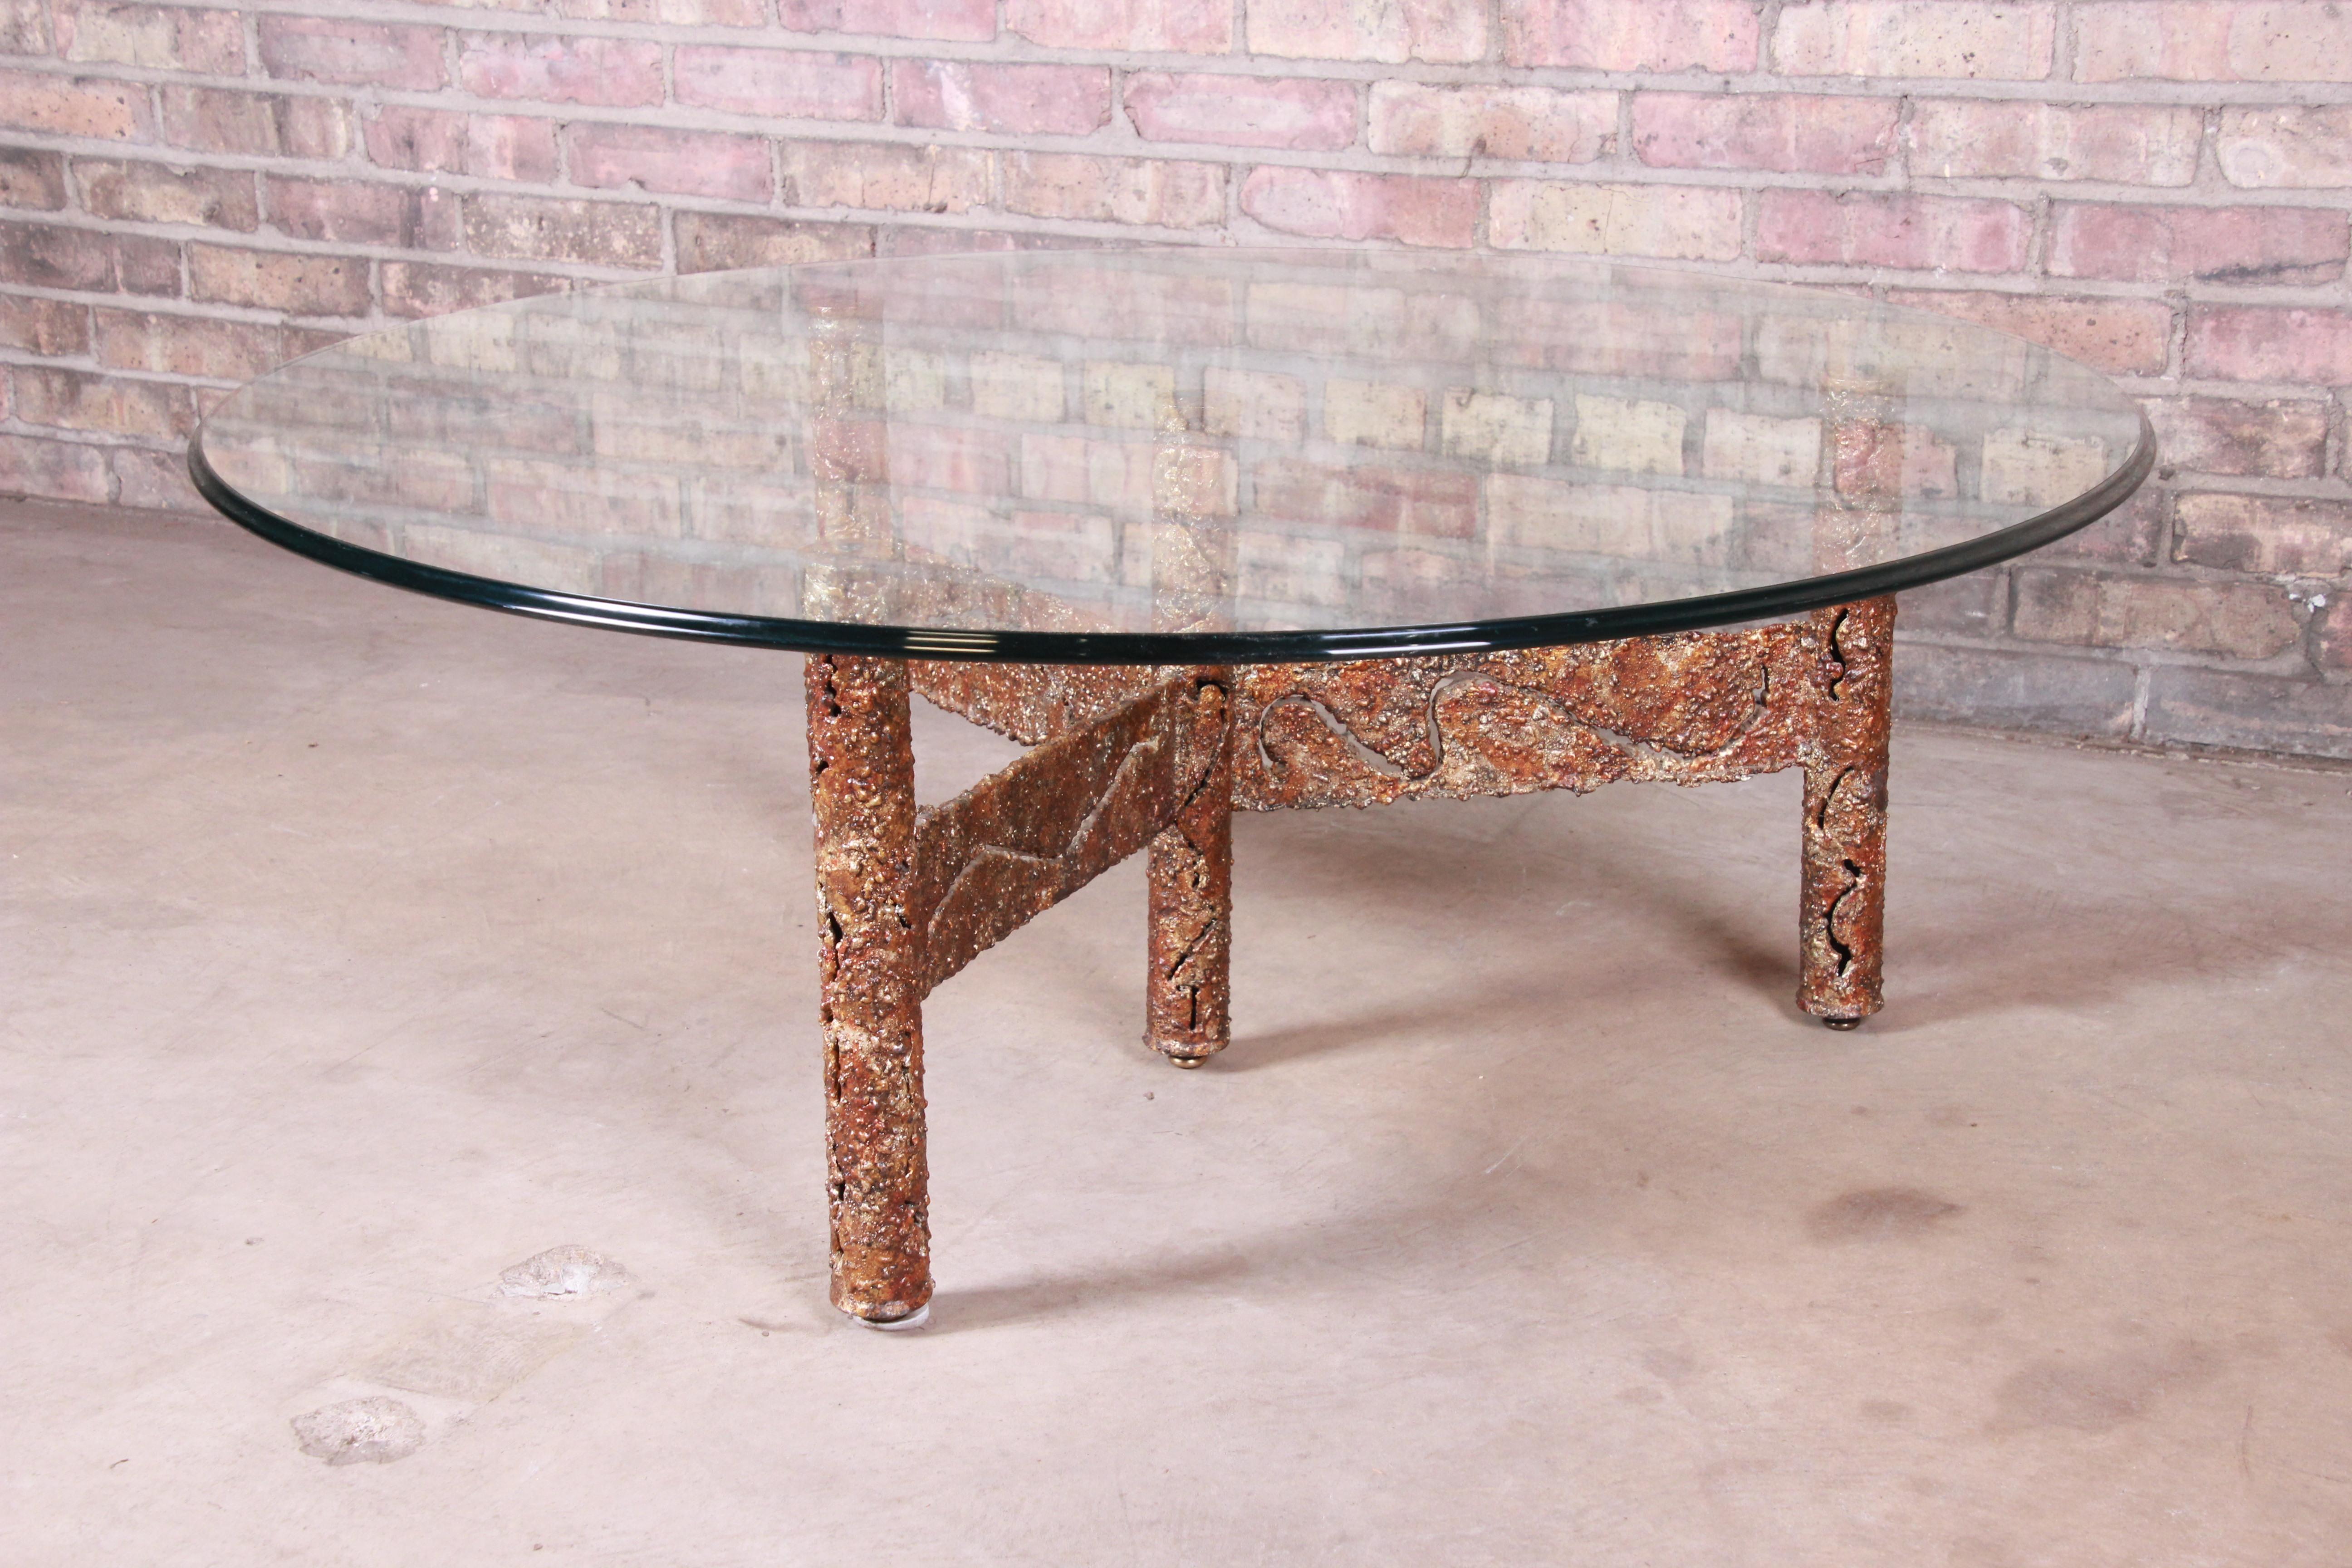 Beveled Silas Seandel Mid-Century Modern Brutalist Mixed Metal Cocktail Table, 1970s